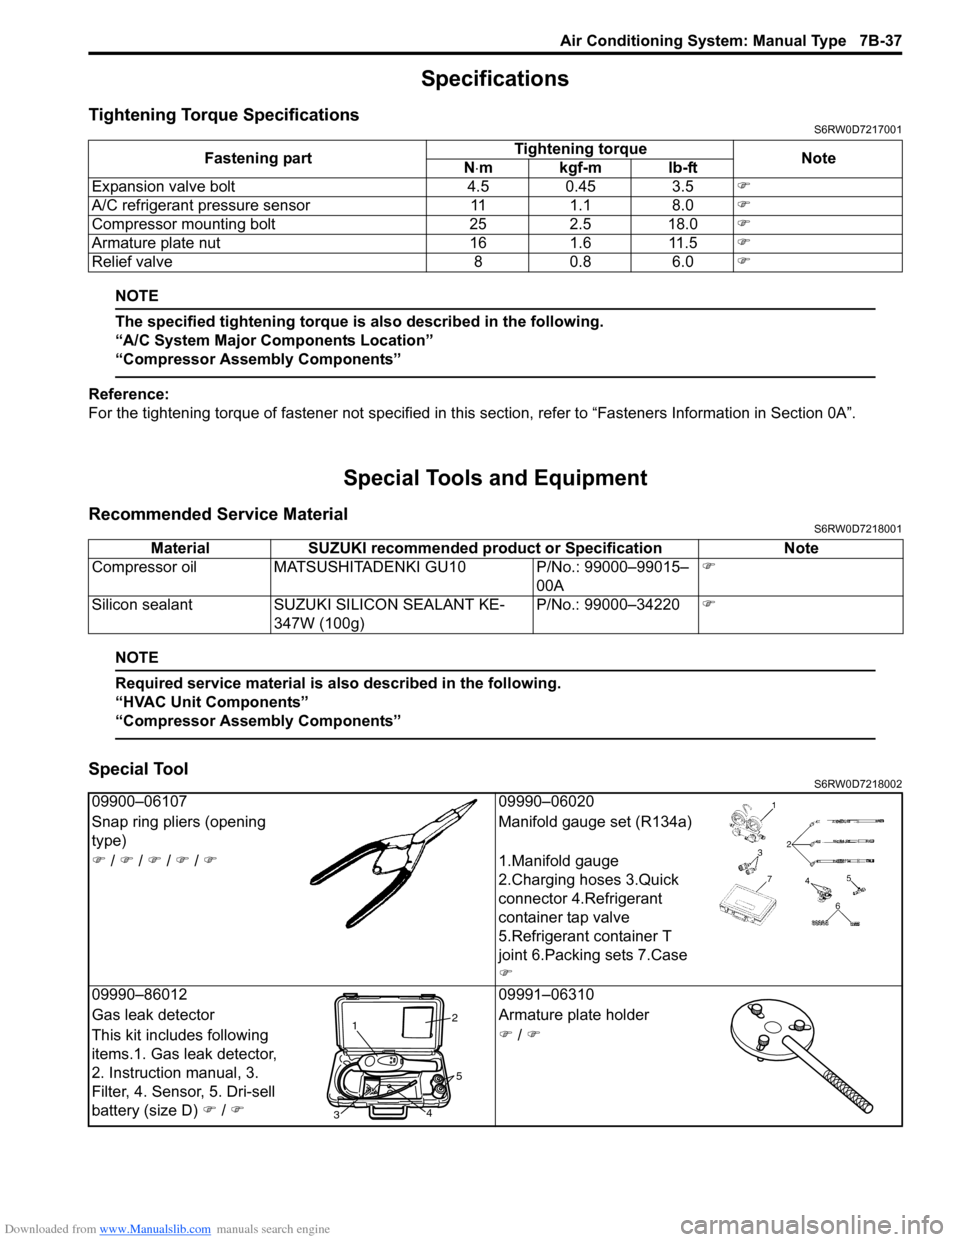 SUZUKI SX4 2006 1.G Service Workshop Manual Downloaded from www.Manualslib.com manuals search engine Air Conditioning System: Manual Type 7B-37
Specifications
Tightening Torque SpecificationsS6RW0D7217001
NOTE
The specified tightening torque is